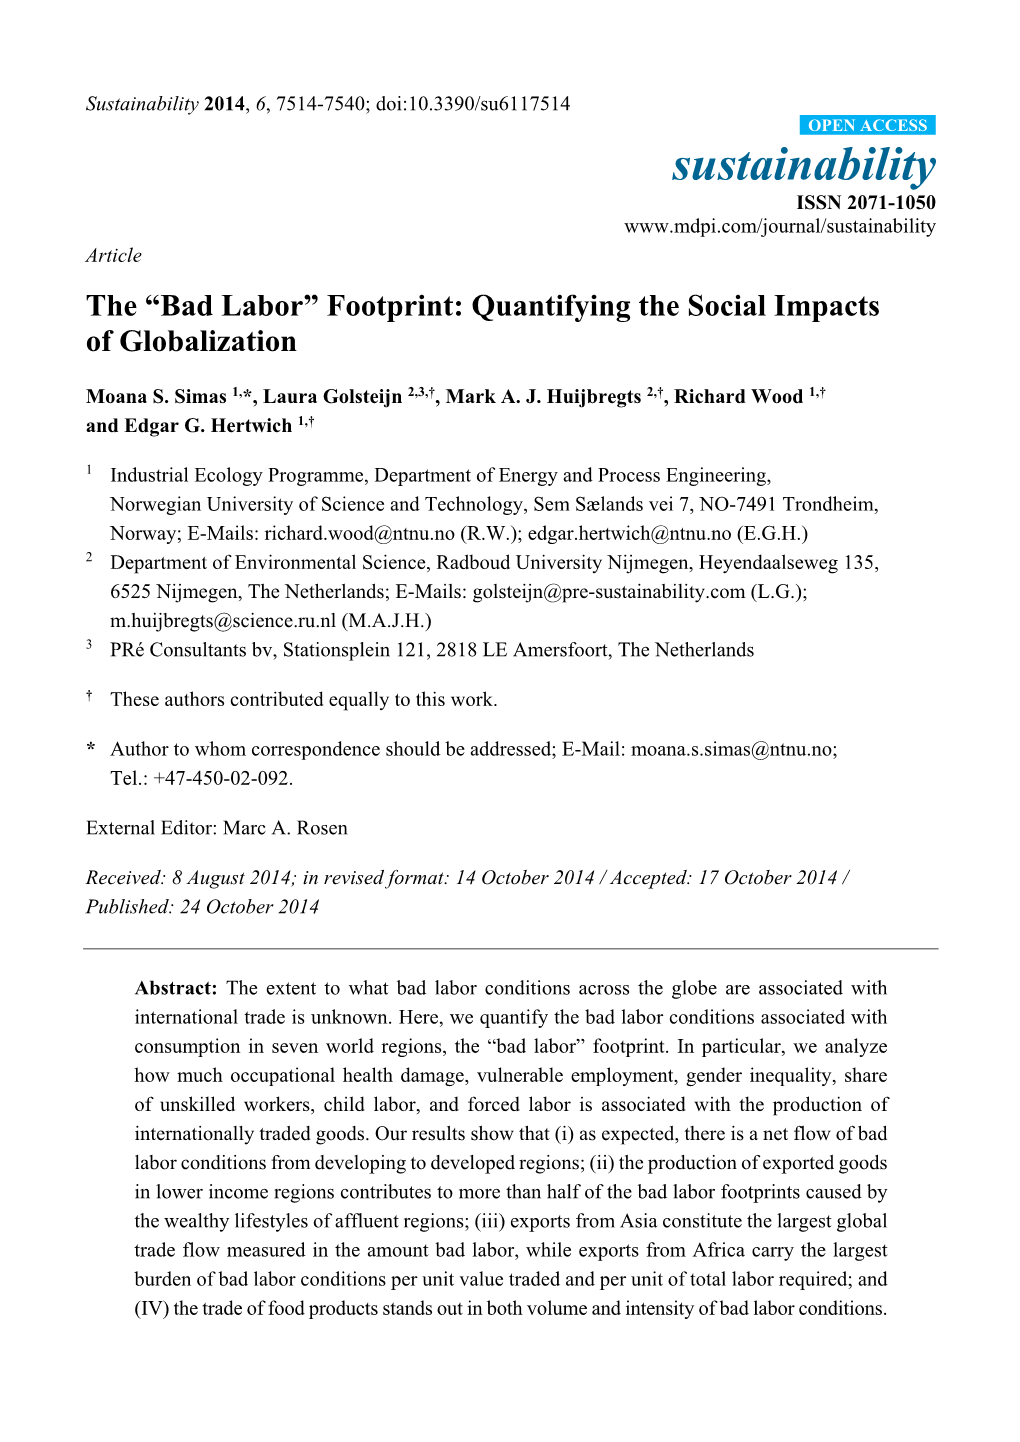 The “Bad Labor” Footprint: Quantifying the Social Impacts of Globalization